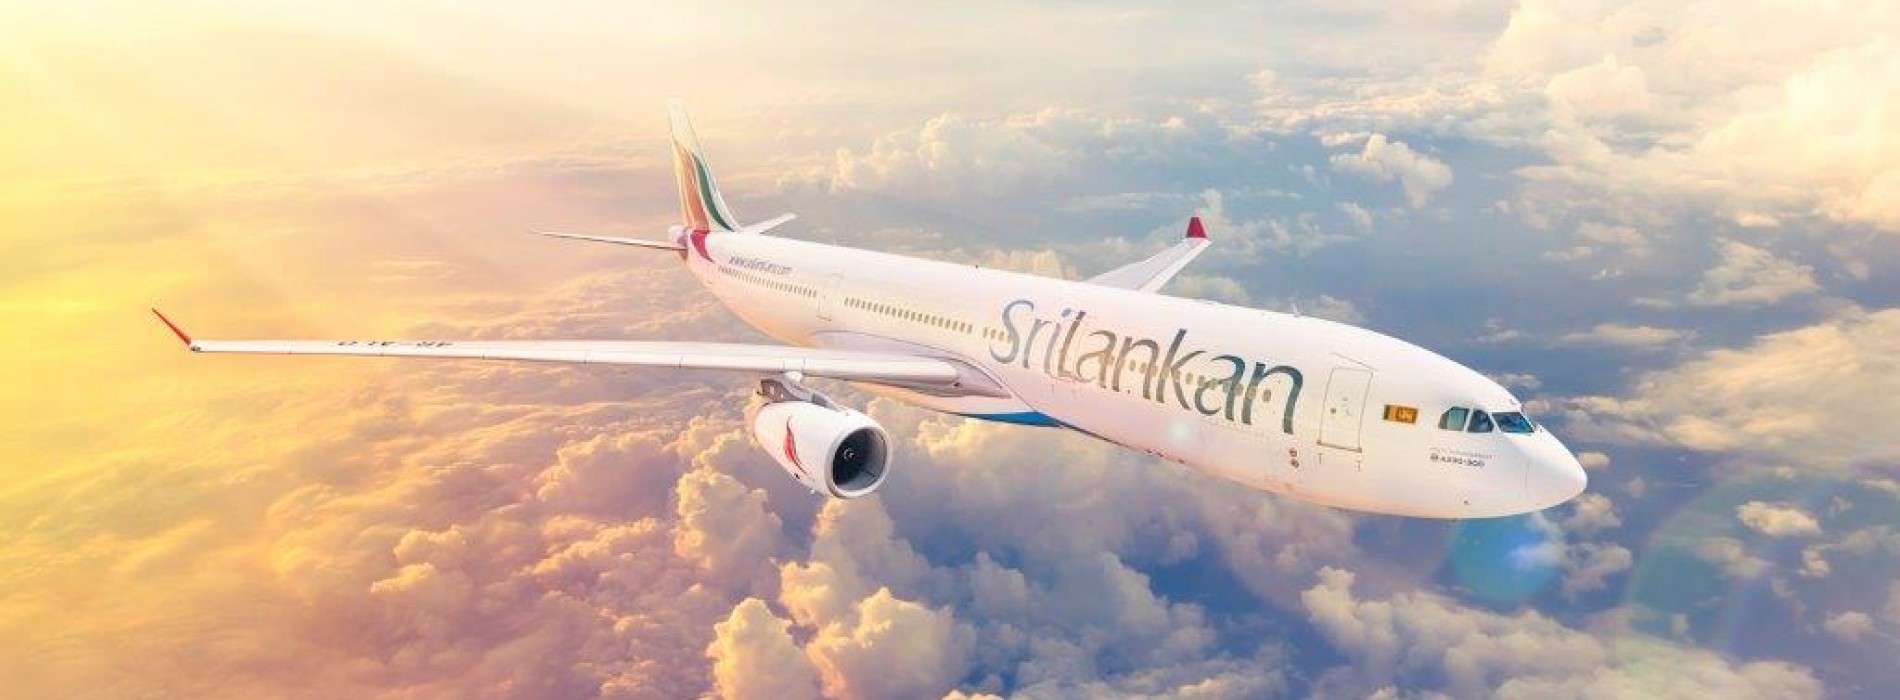 SriLankan Airlines uplifted largest vaccine consignment to Sri Lanka